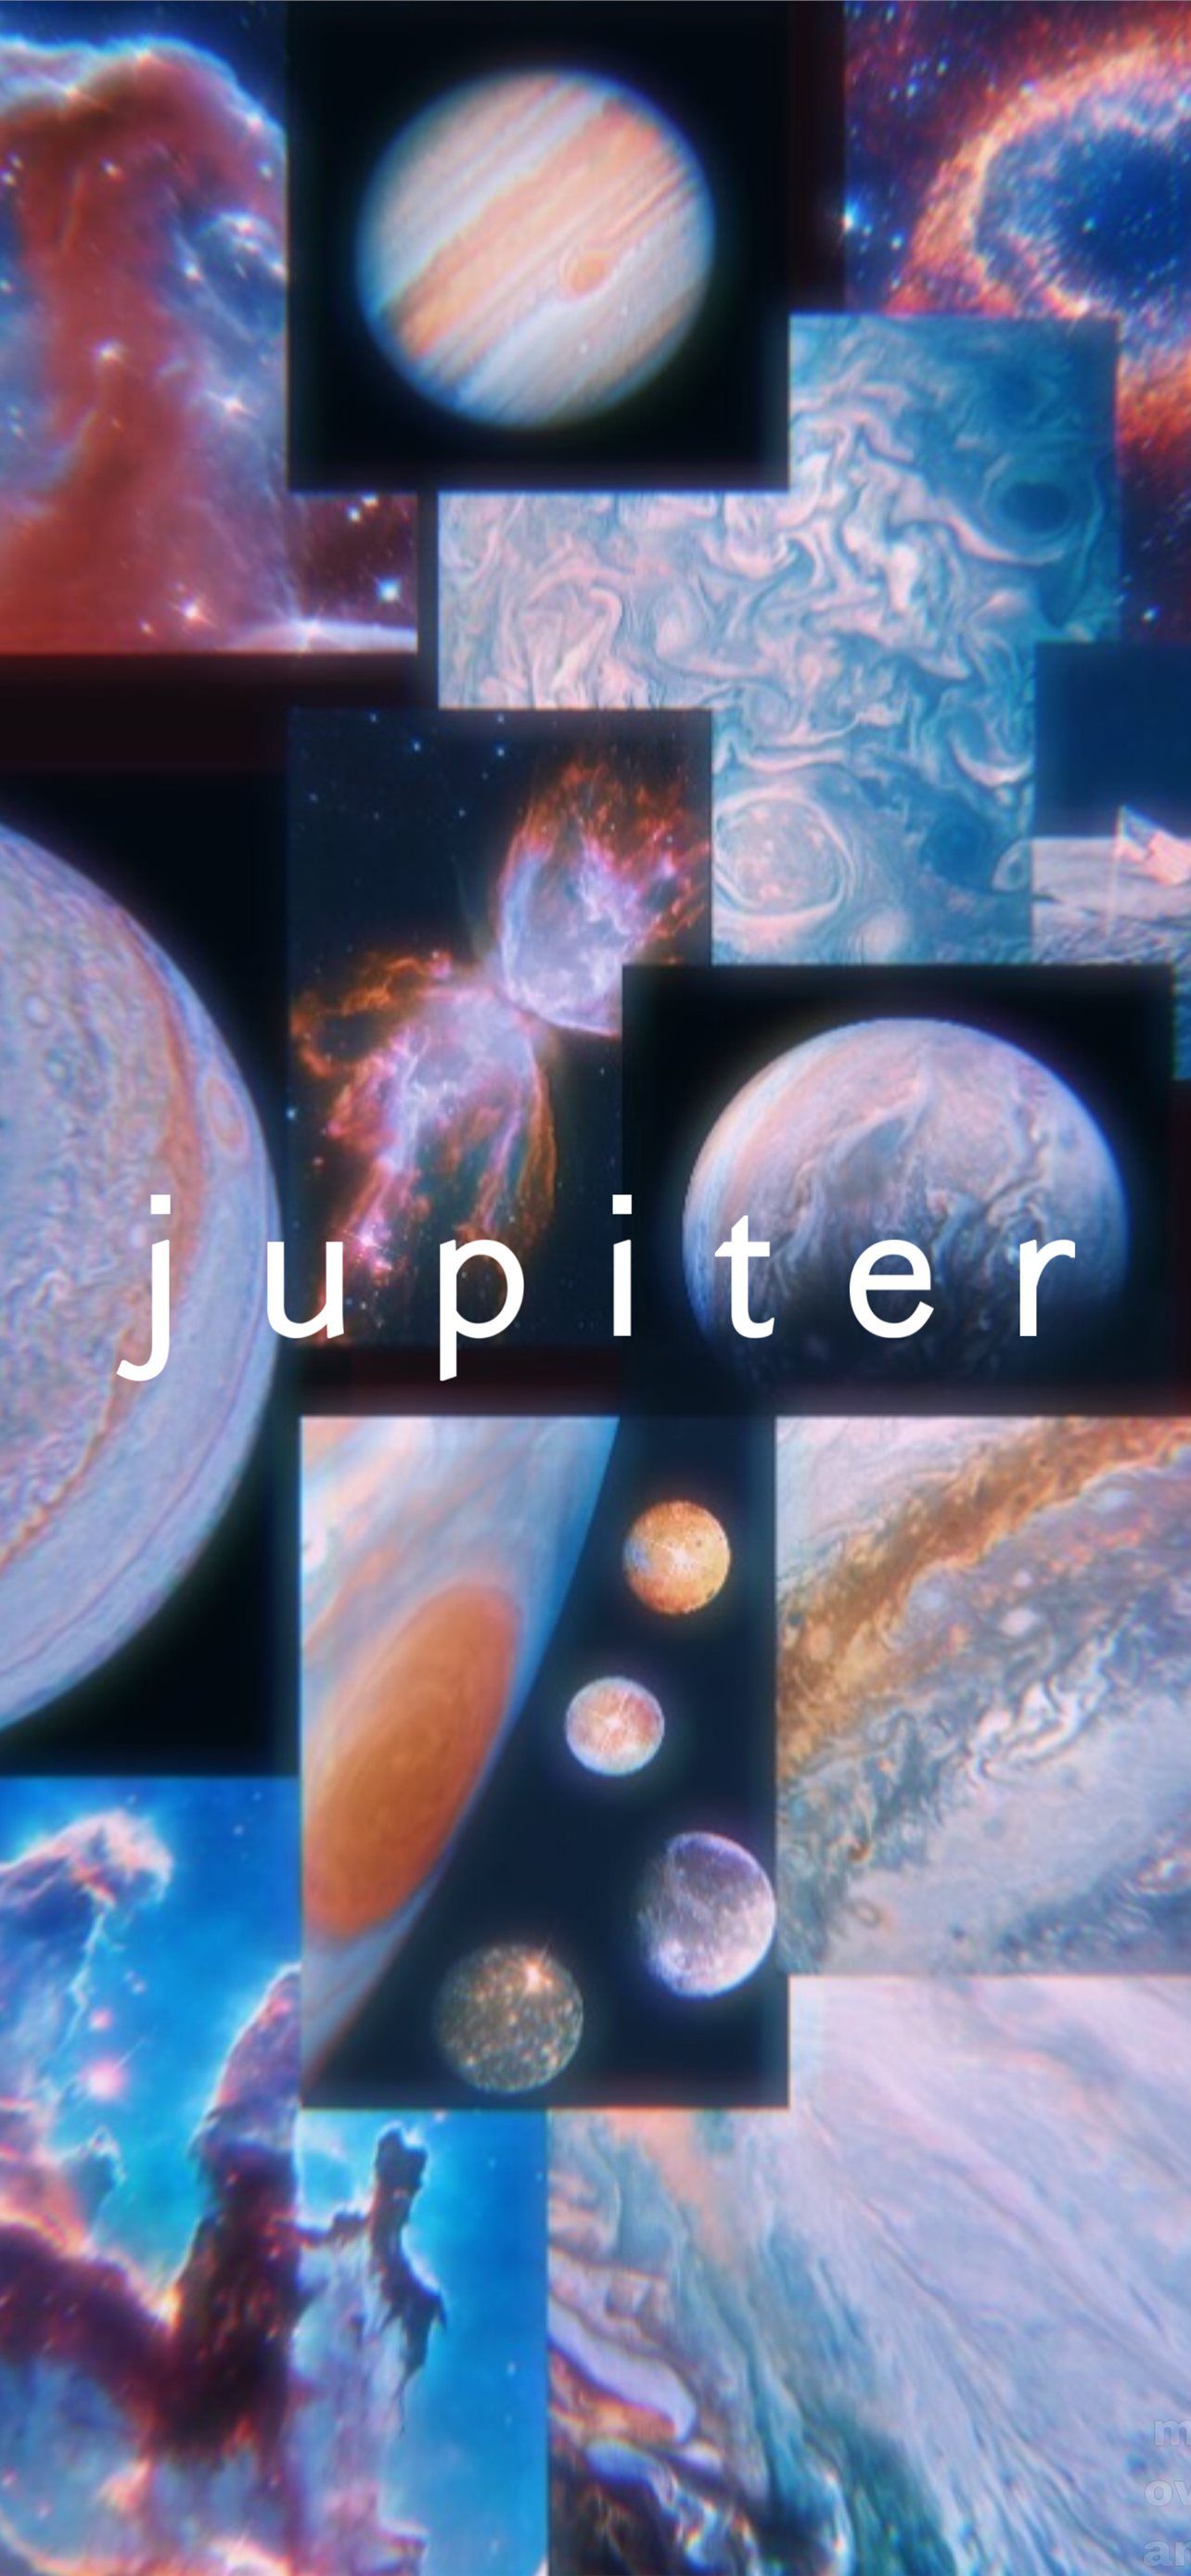 Jupiter, the fifth planet from the sun, is known for its Great Red Spot, a giant storm that has been raging for centuries. - Science, planet